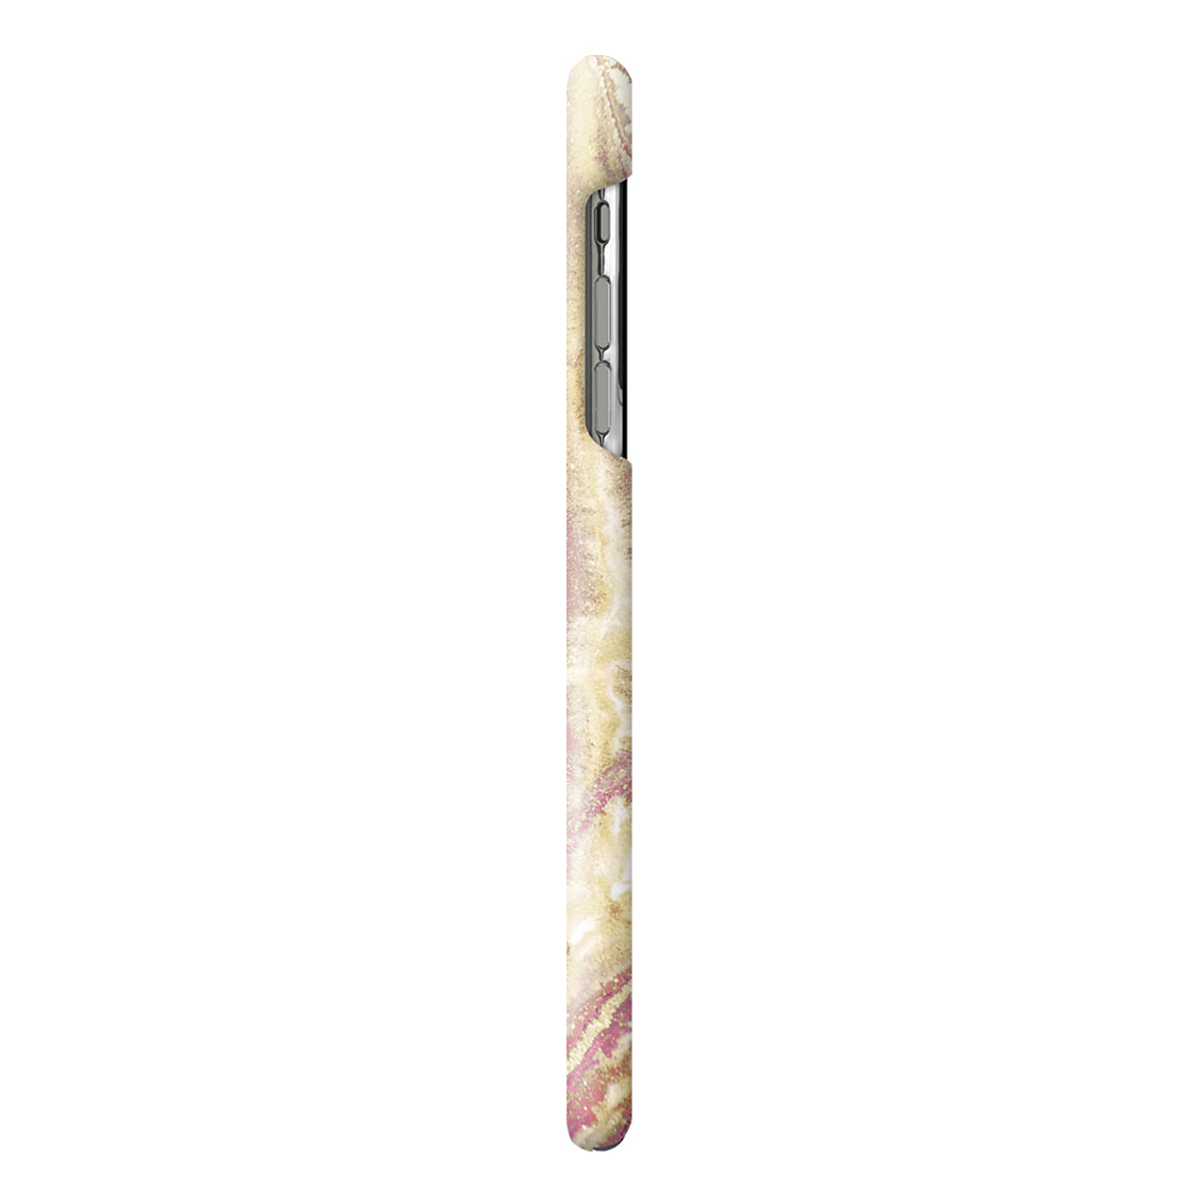 iDeal Fashion Case magnetskal iPhone XS Max, Golden Blush Marble